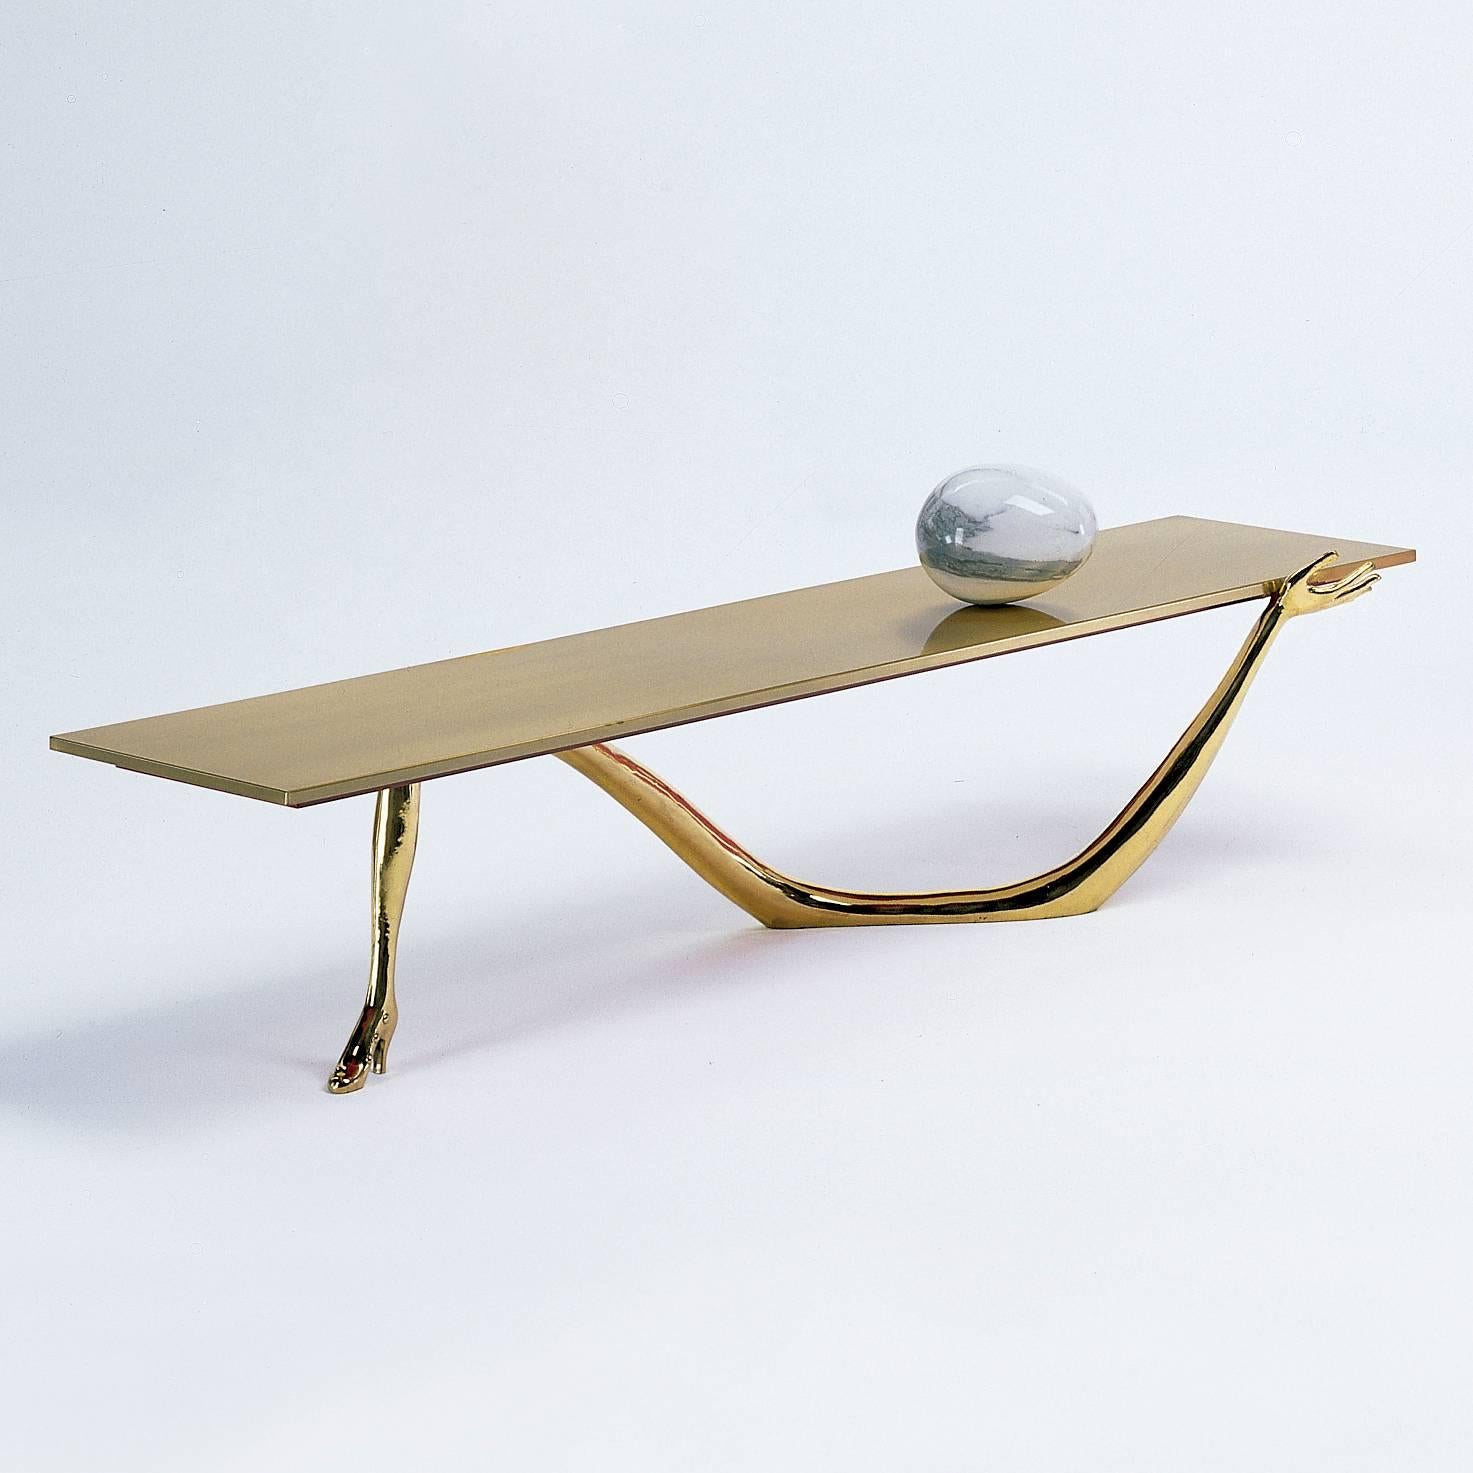 Leda low table designed by Dali manufactured by BD.

Legs are in a cast varnish brass.
Tabletop in brushed and varnished brass.
Carrara marble egg on top.

Measures: 51 x 190 x 61 H cm

During the ‘1930s in Paris, Salvador Dalí surrounded